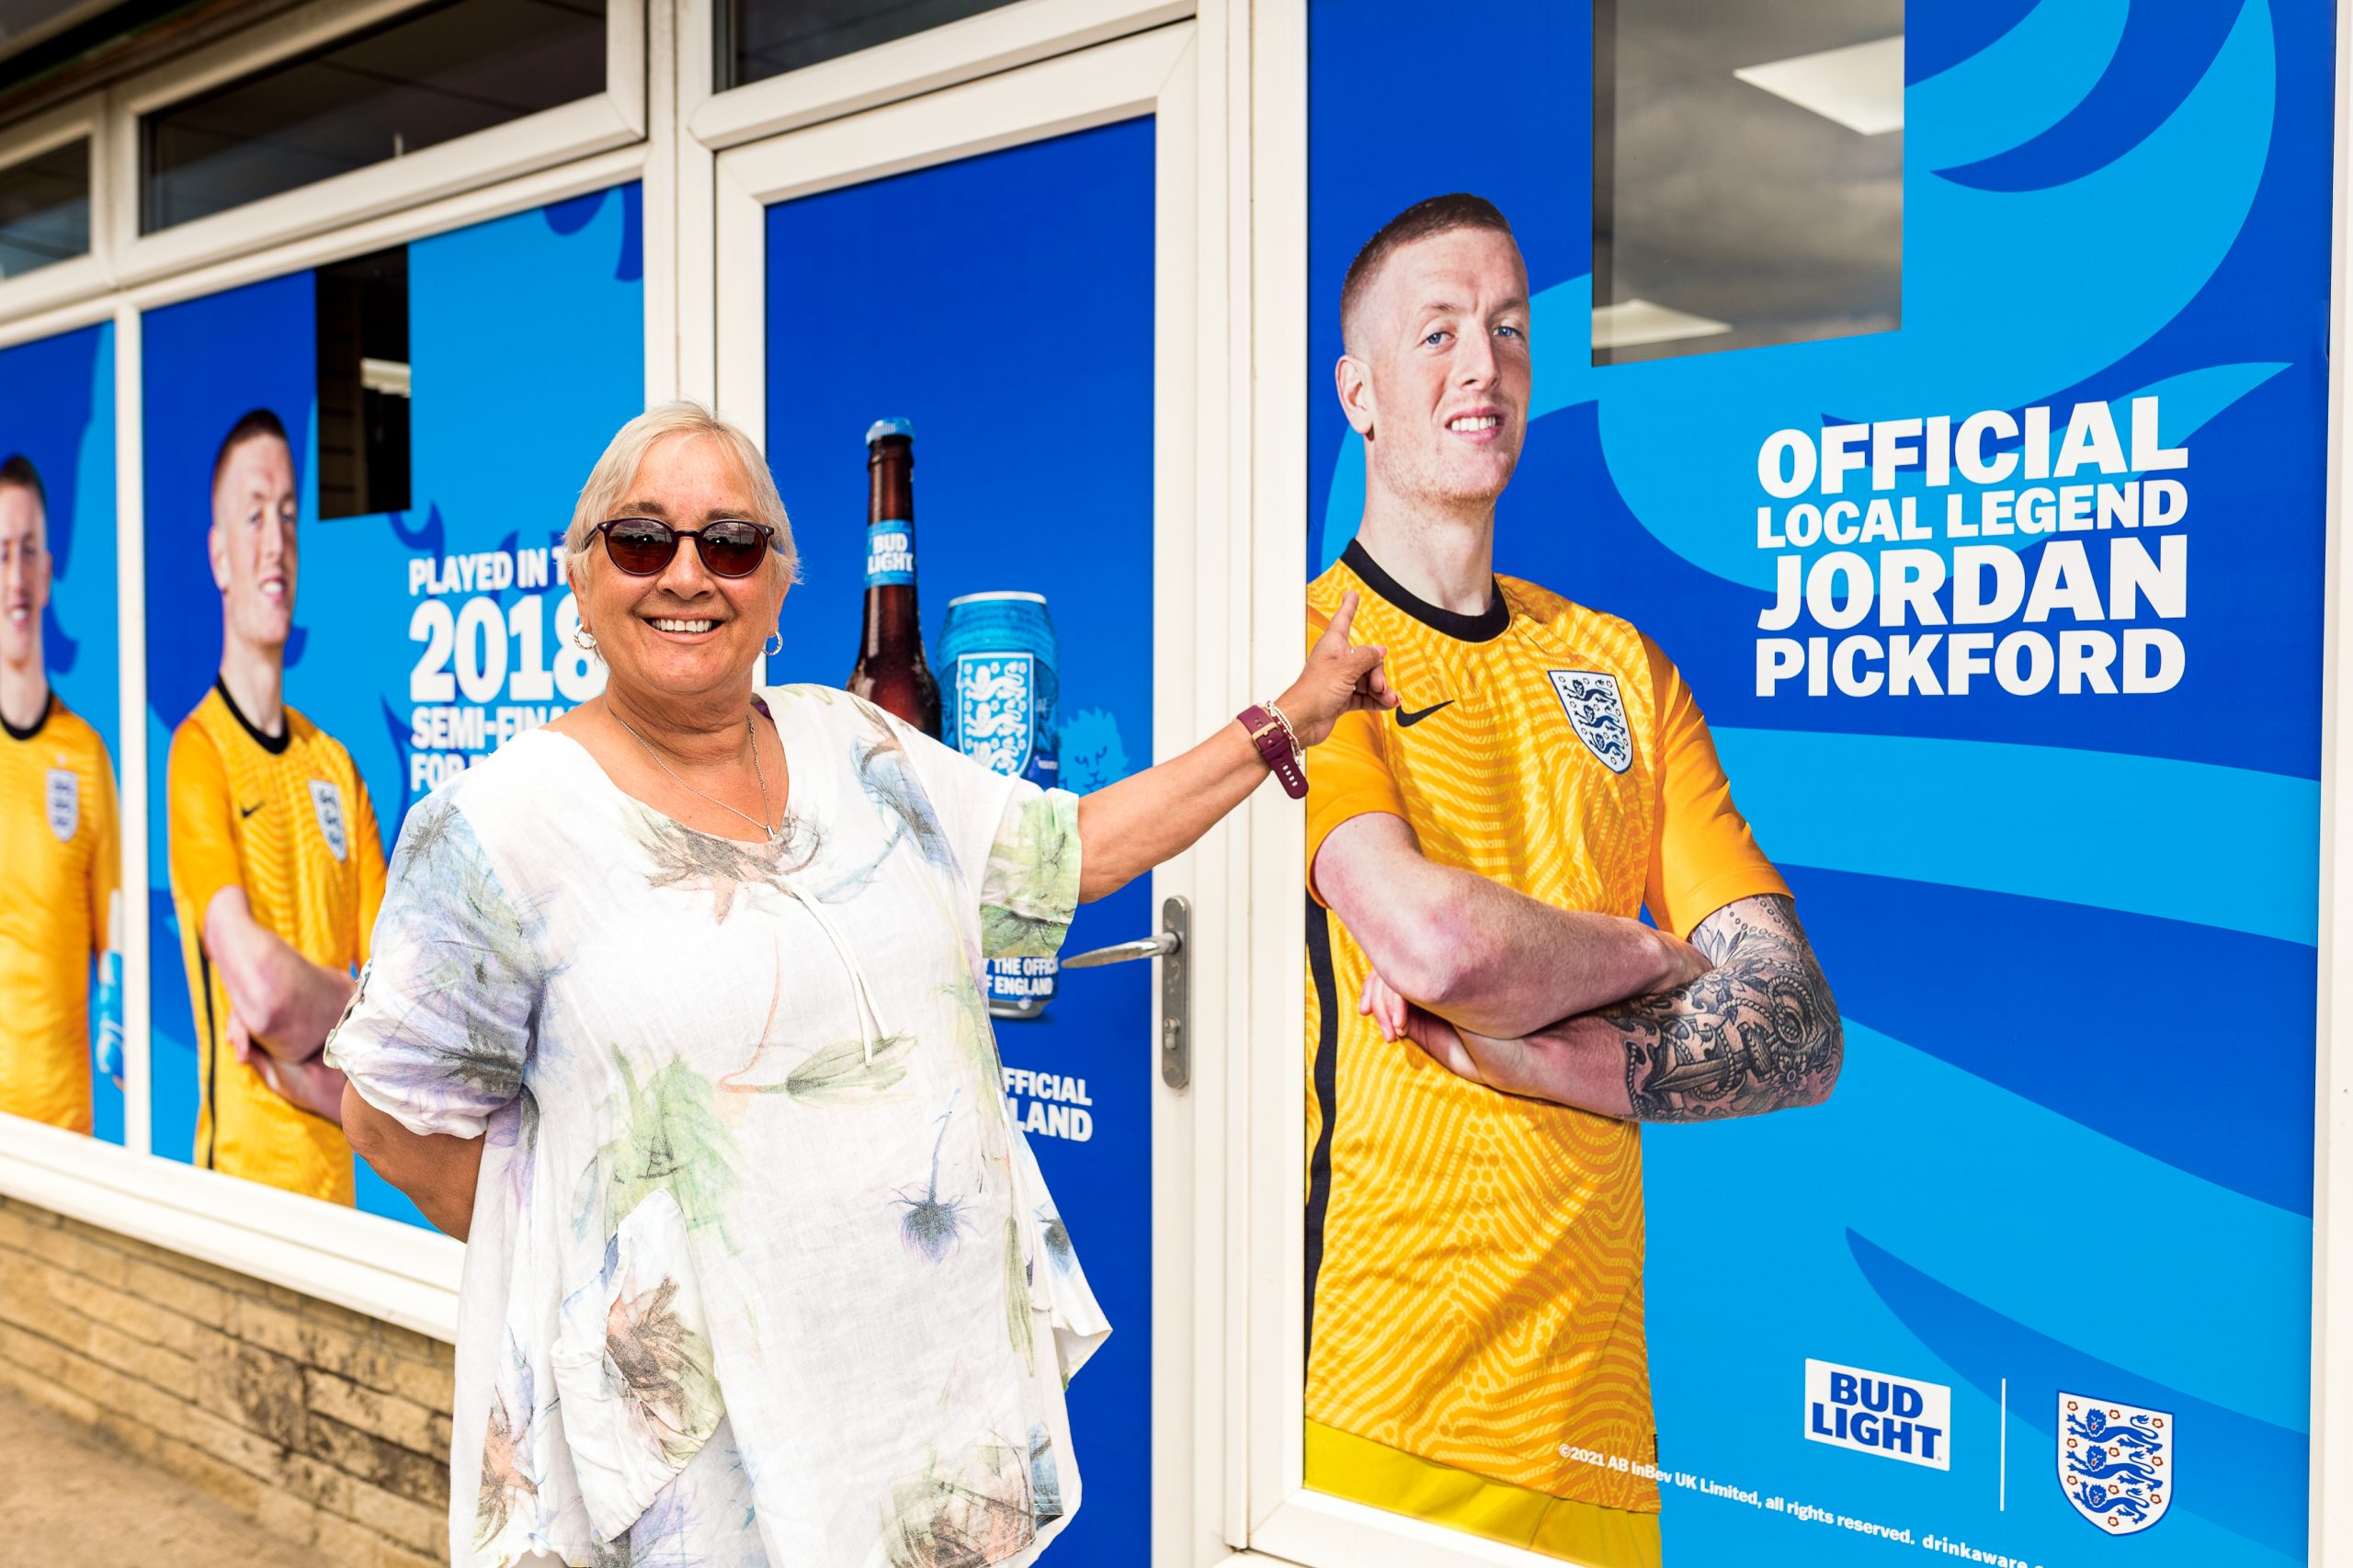 Bud Light convenience store takeovers celebrate England’s Local Legends